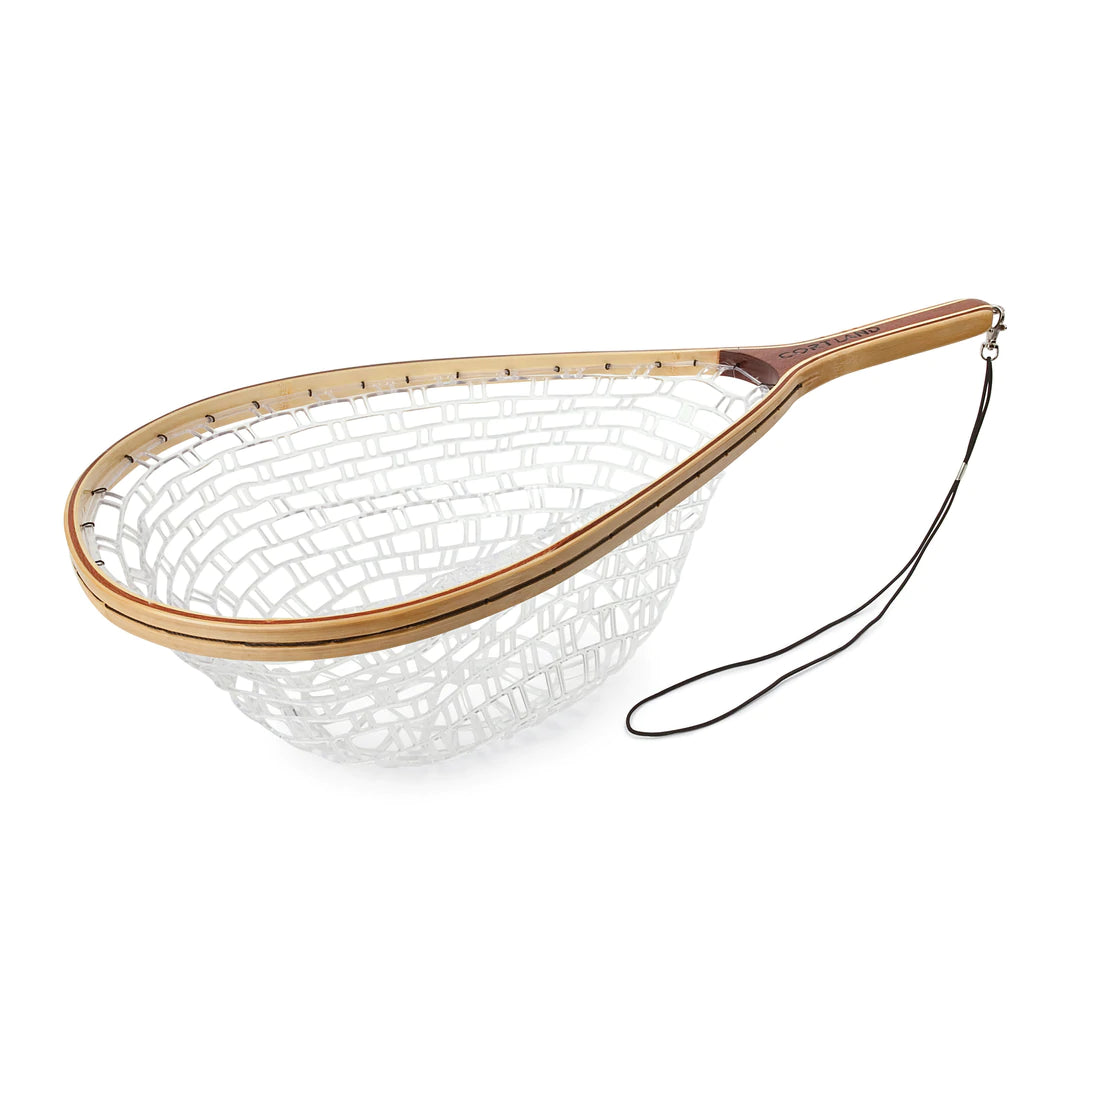 Bamboo Clear Catch & Release Net